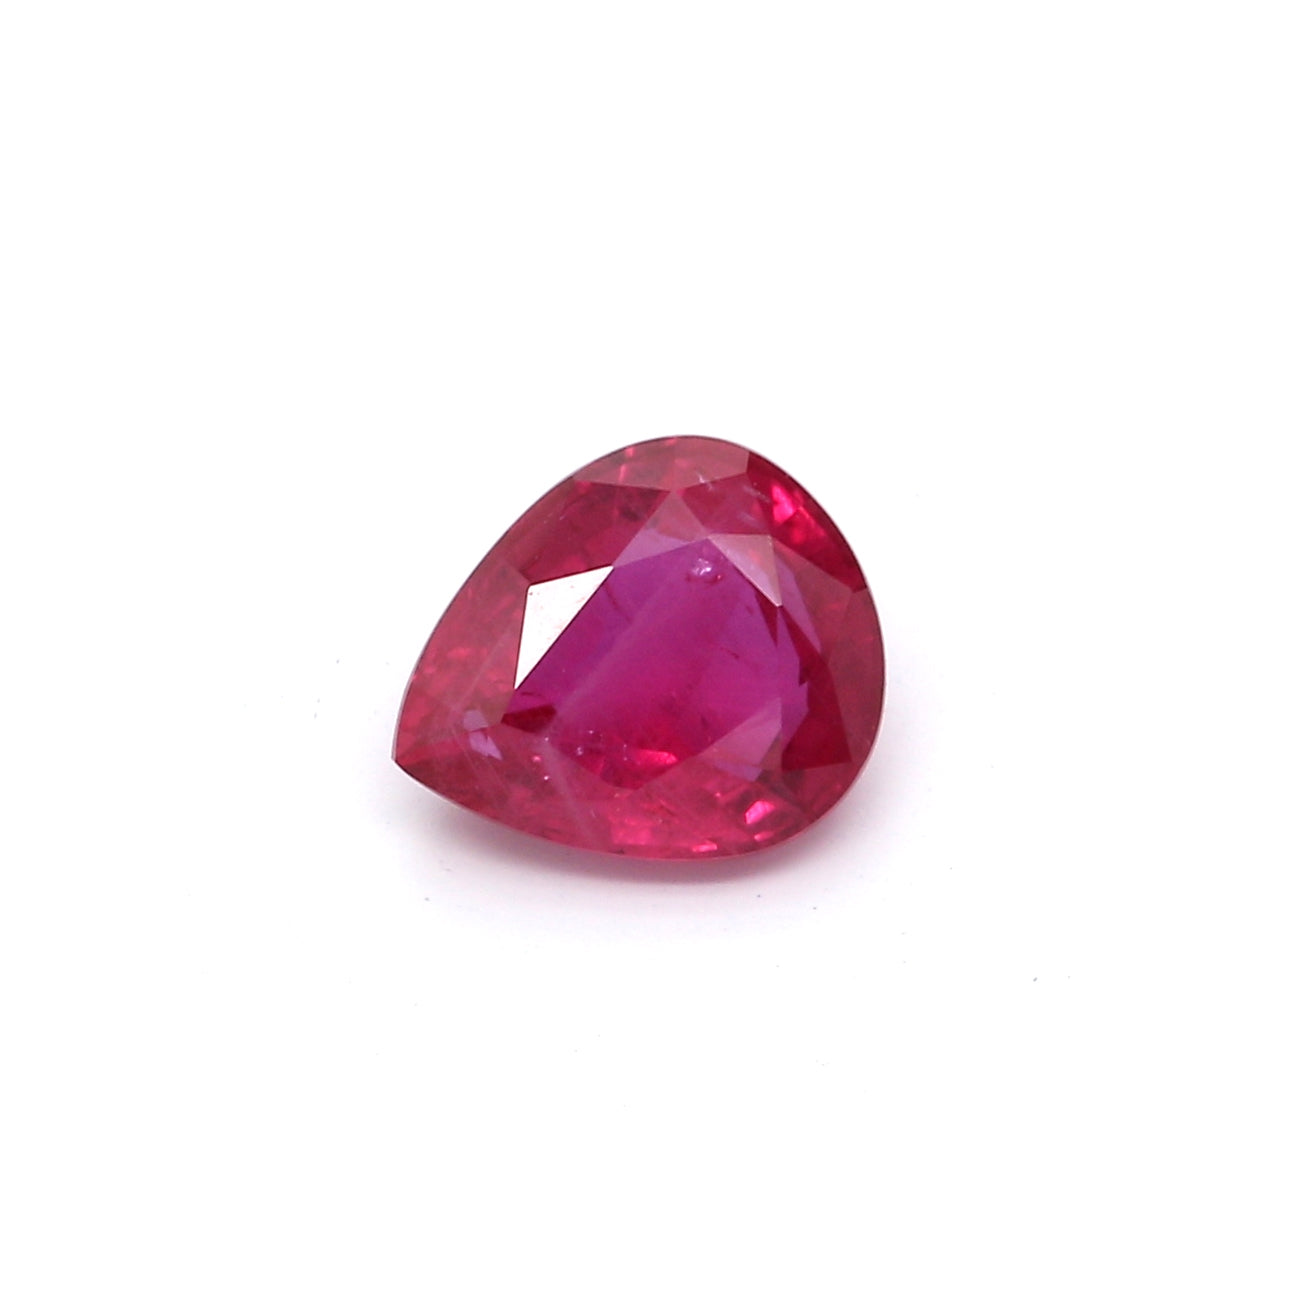 0.65ct Pinkish Red, Pear Shape Ruby, Heated, Thailand - 5.88 x 4.97 x 2.65mm